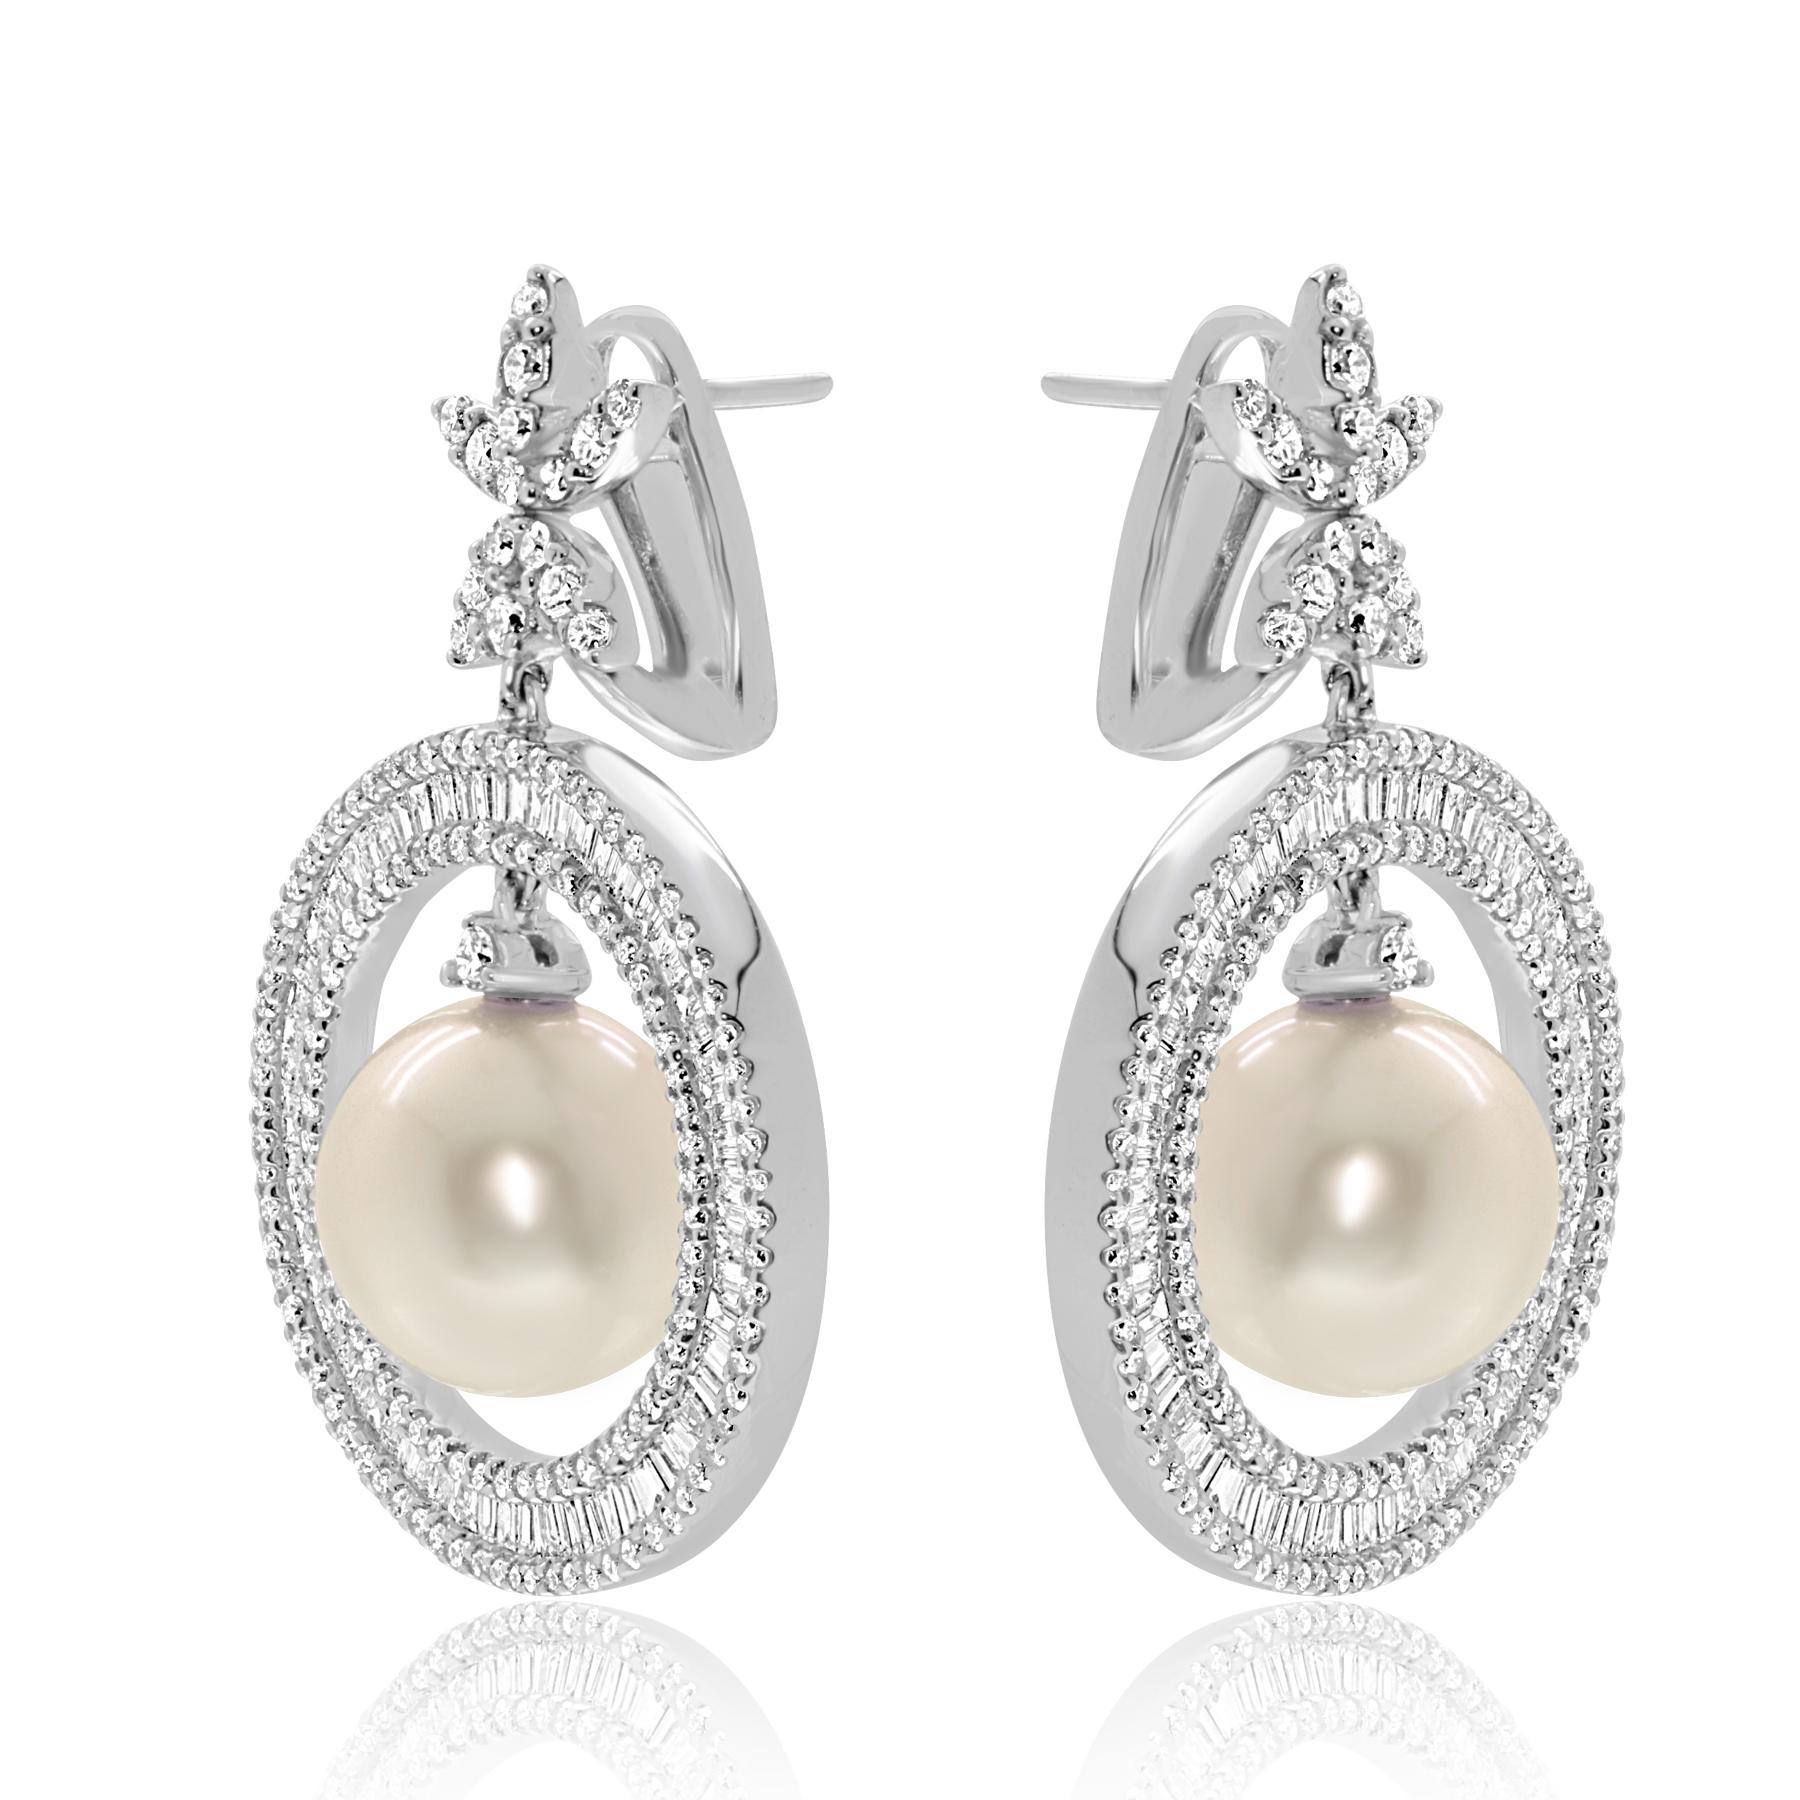 A true timeless treasure!!
show off your sophisticated style when you wear this amazing eye-catching pair of earrings.
beautiful pearl (11mm) surrounded by a big hoop fully set with brilliant and baguette cut diamonds weighing 3.05ct in total, the